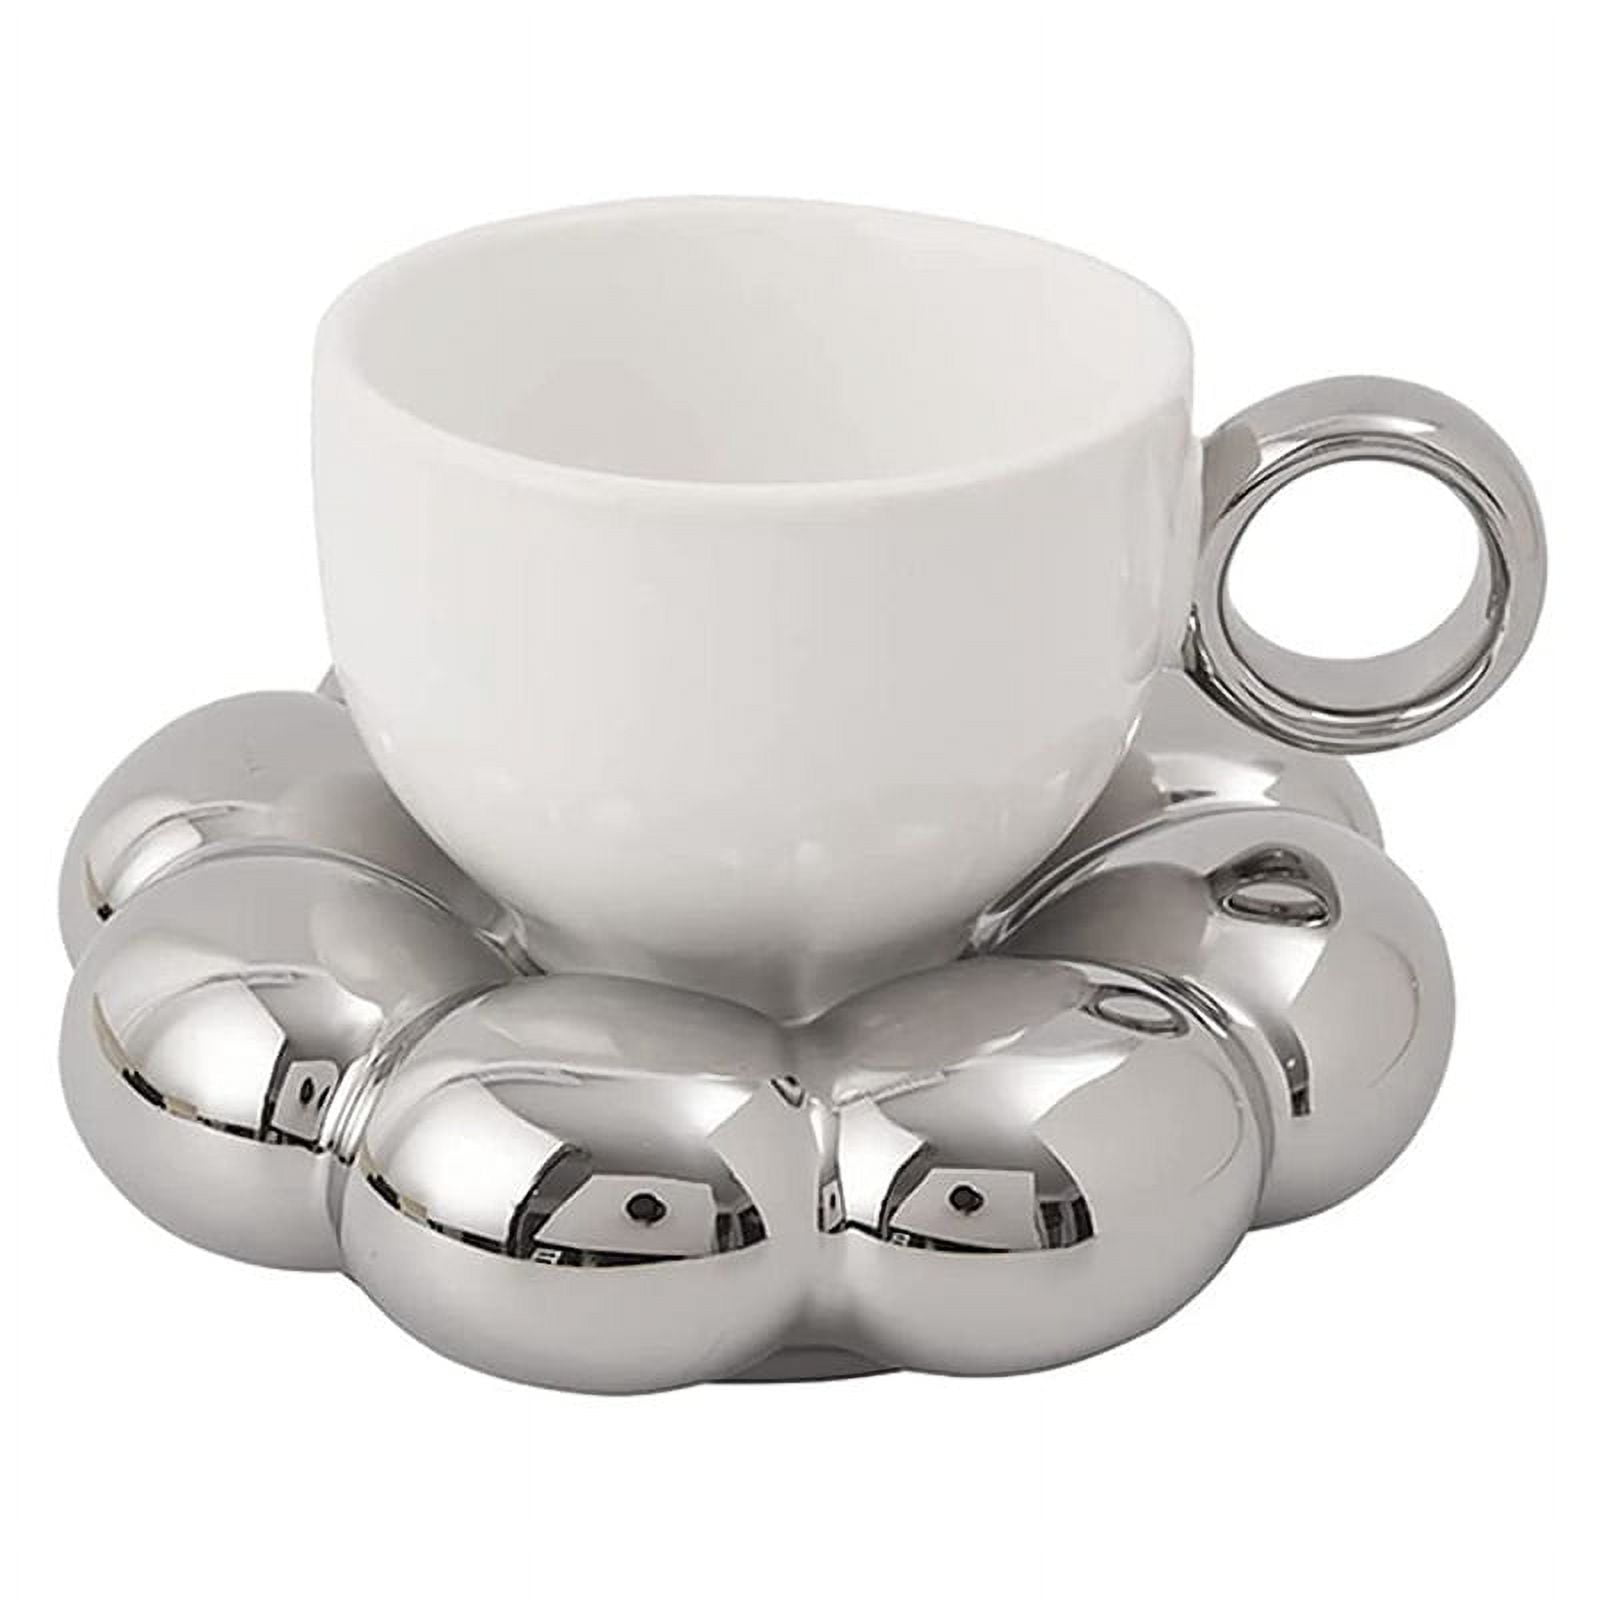 Mora Ceramic Cups —8oz Coffee Cup Set With Saucers, Assorted Neutral